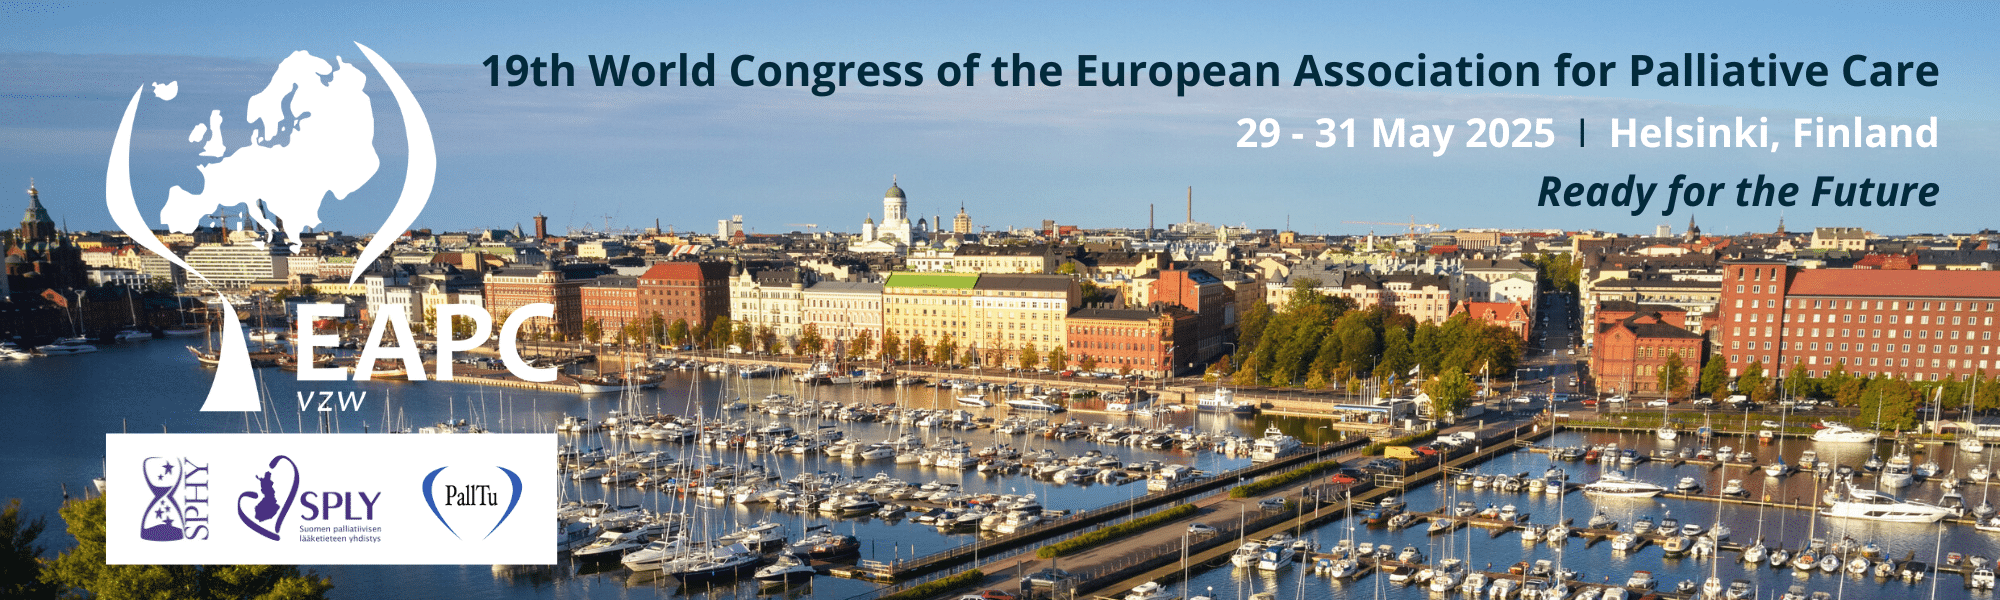 19th World Congress of the EAPC